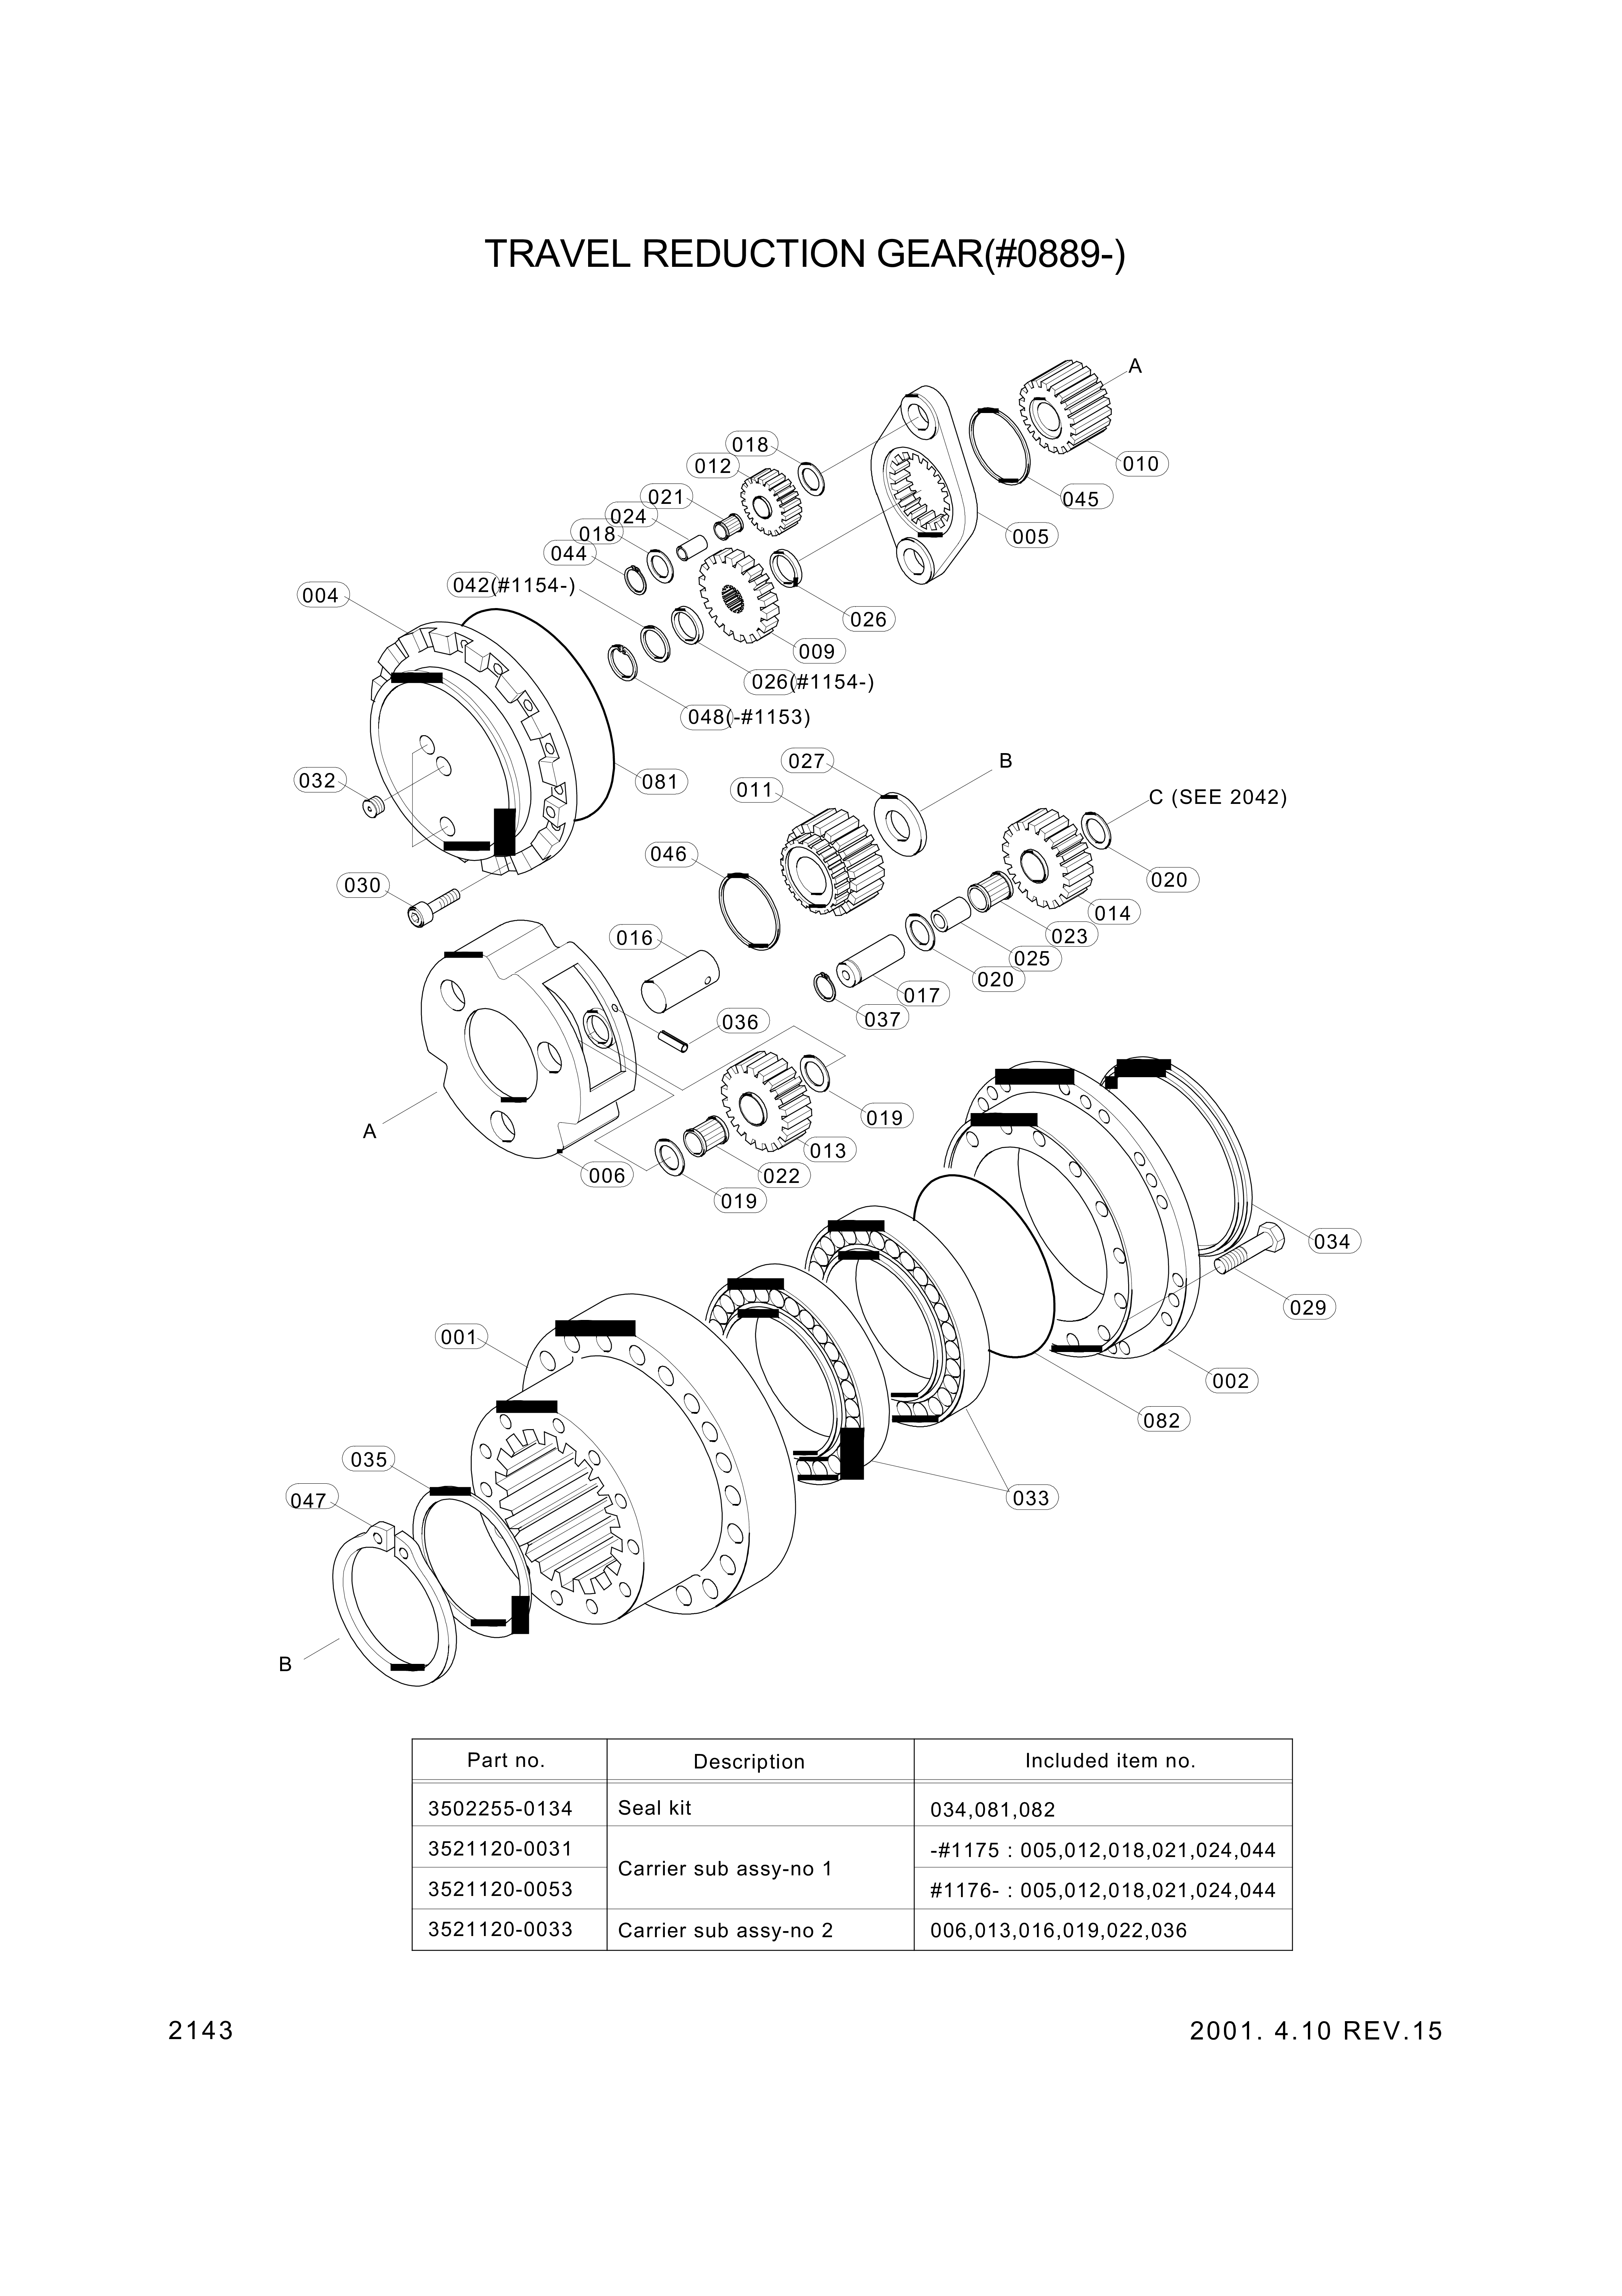 drawing for Hyundai Construction Equipment 3550D-01B - T/Reduction Gear (figure 5)